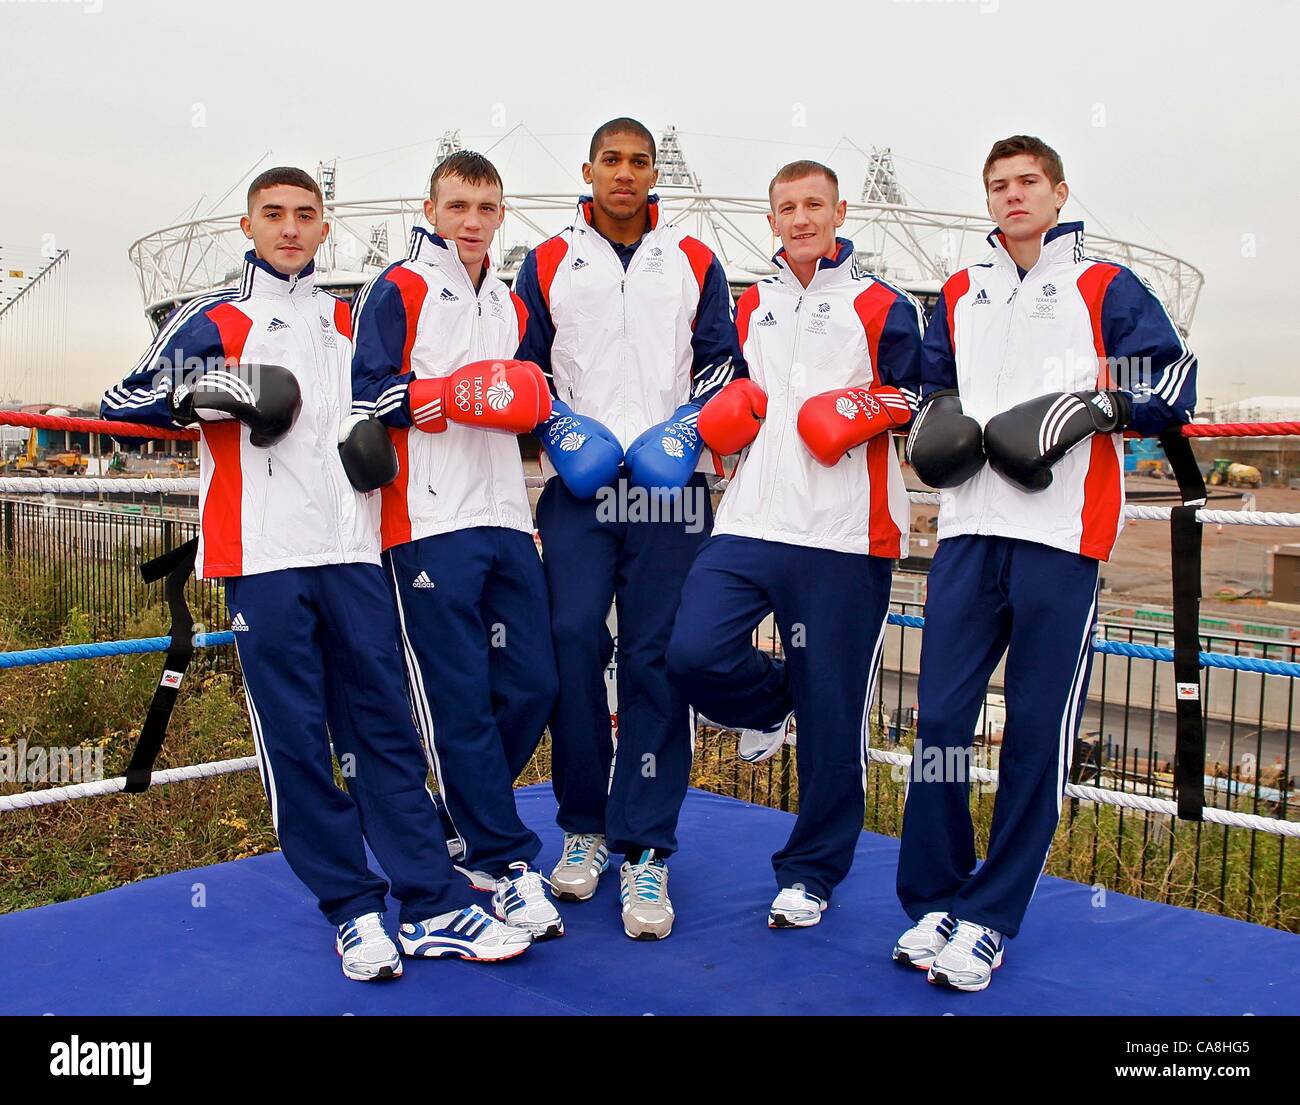 STRATFORD, LONDON, UK, Friday 02/12/2011. (l to r) - Andrew Selby, Fred Evans, Anthony Joshua, Tom Stalker and Luke Campbell. TeamGb announce first 5 boxers for the Olympics in 2012. Stock Photo